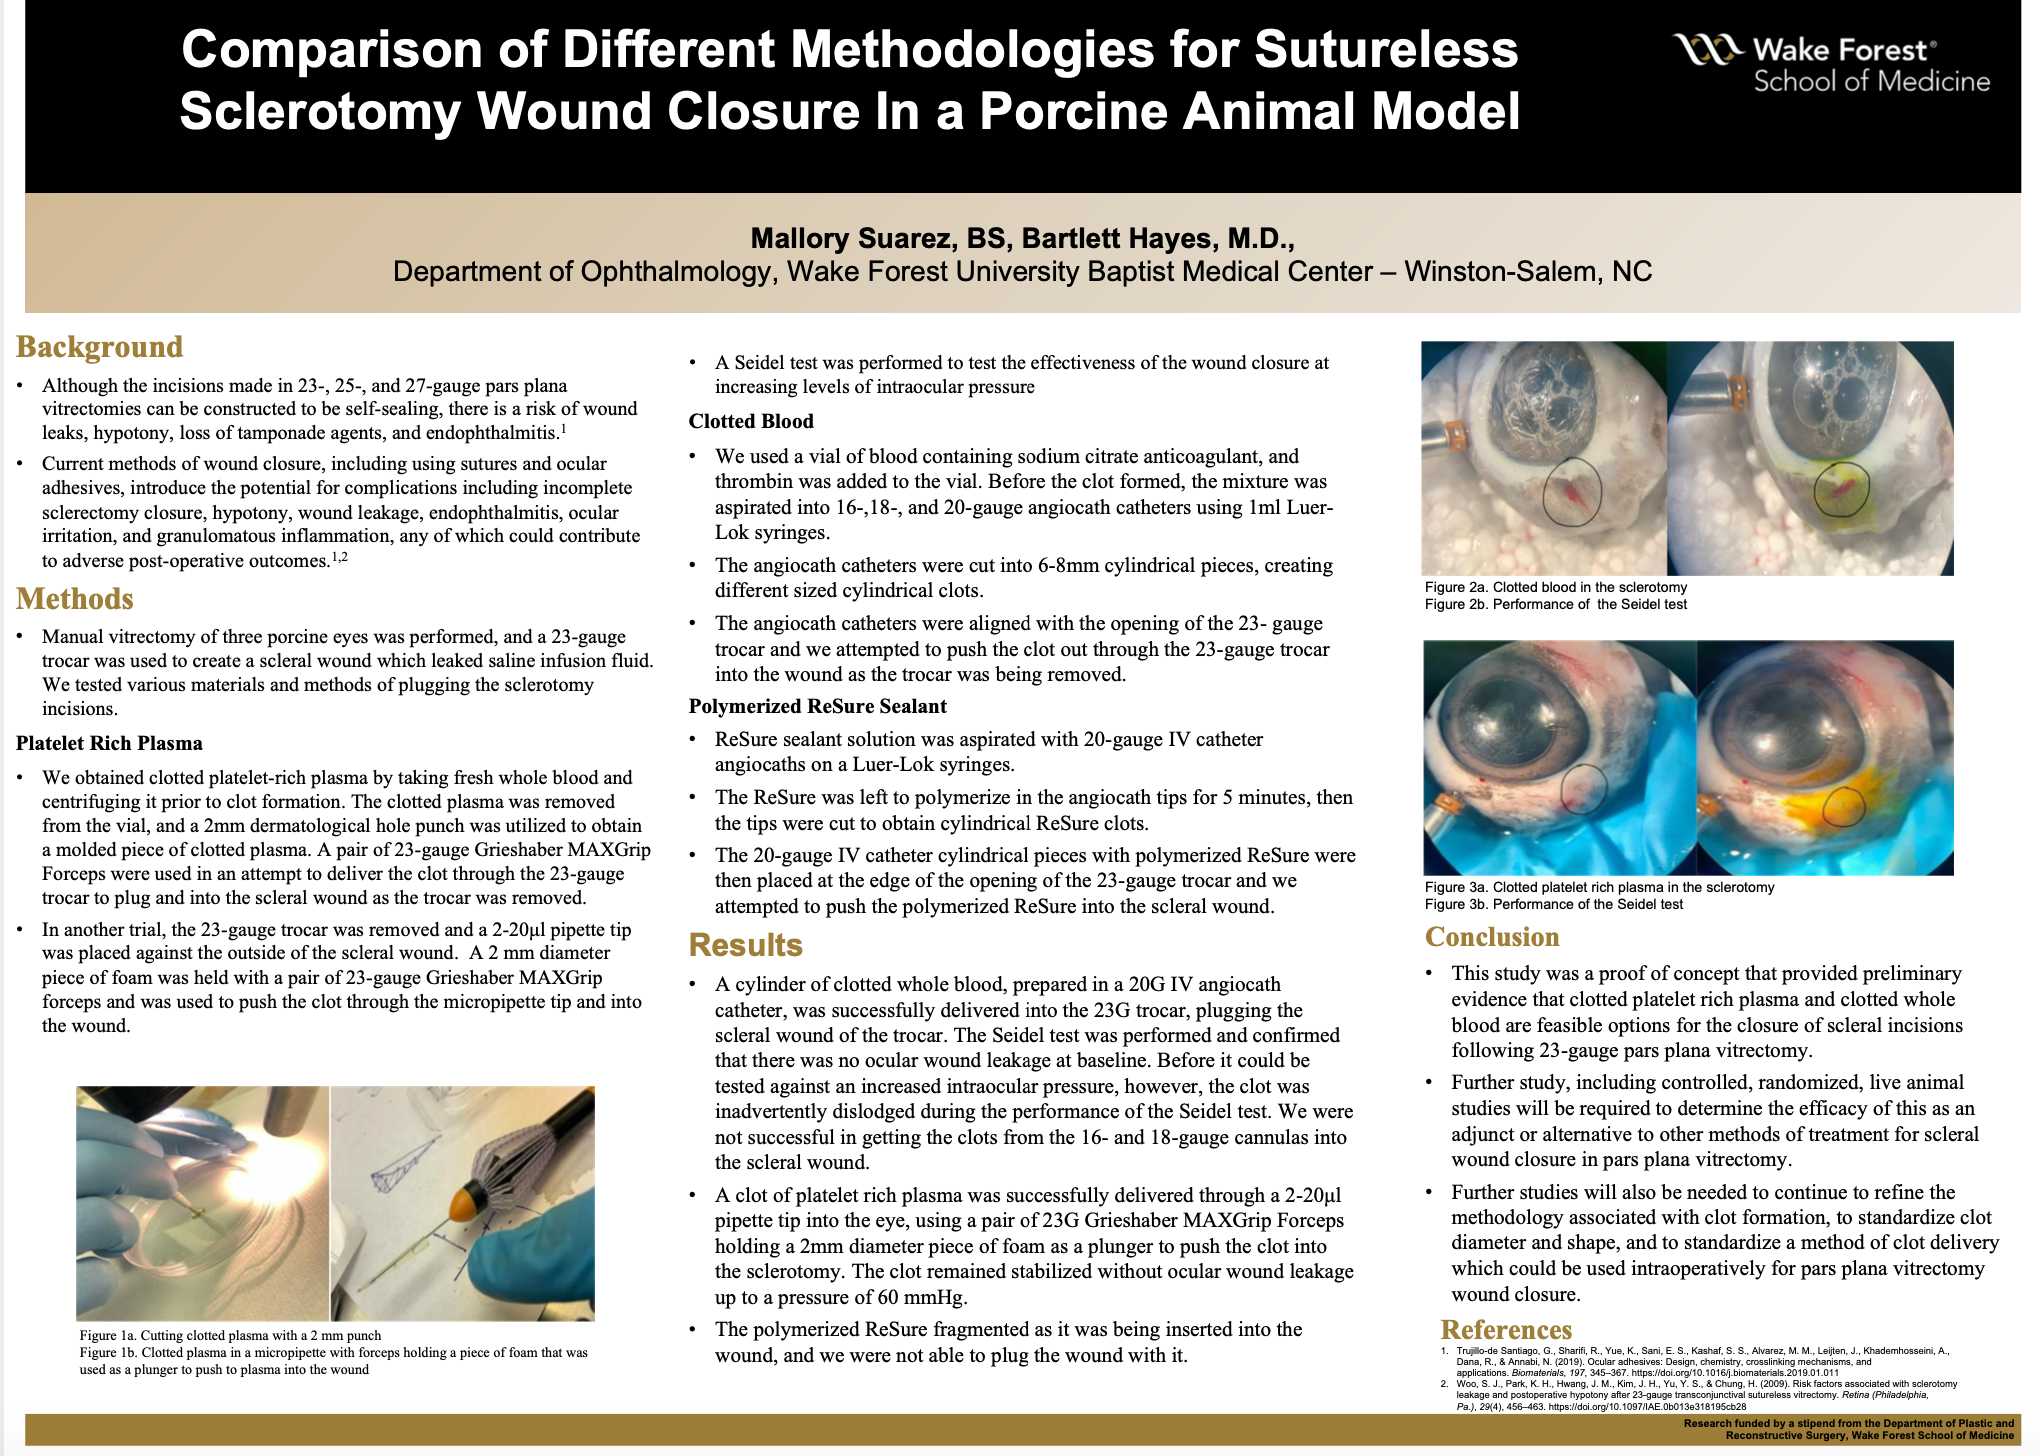 Showcase Image for Comparison of Different Methodologies for Sutureless Sclerotomy Wound Closure In a Porcine Animal Model 